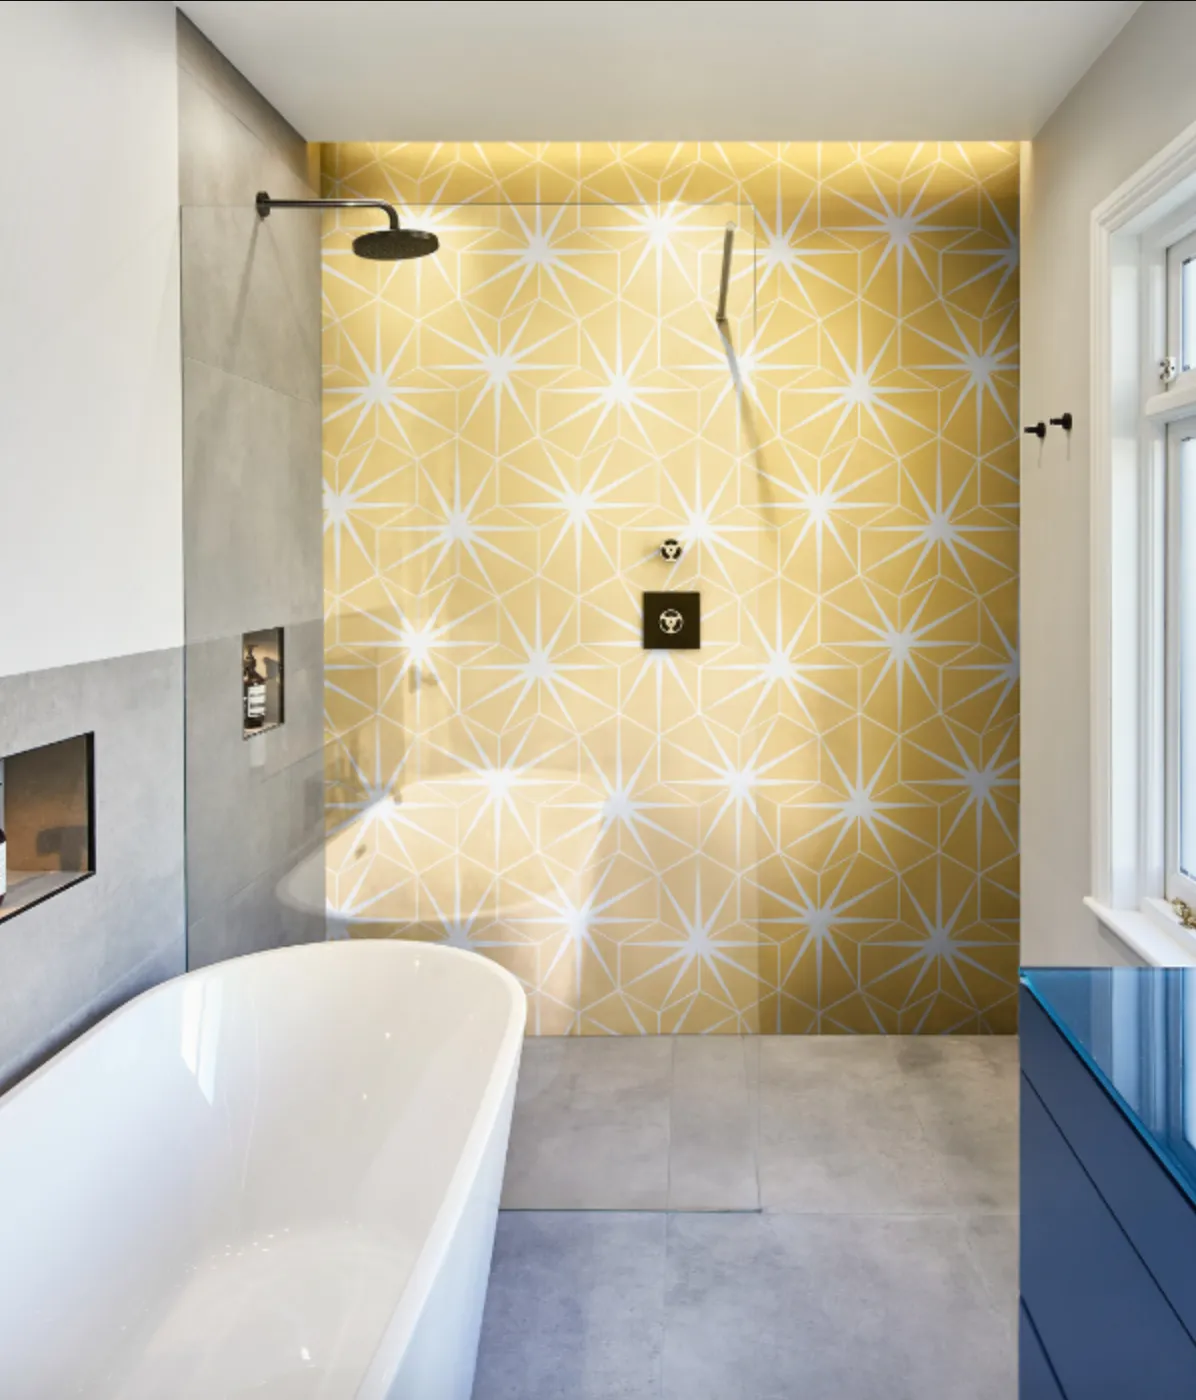 Lily Pad Porcelain Tile in Custard, Ca Pietra